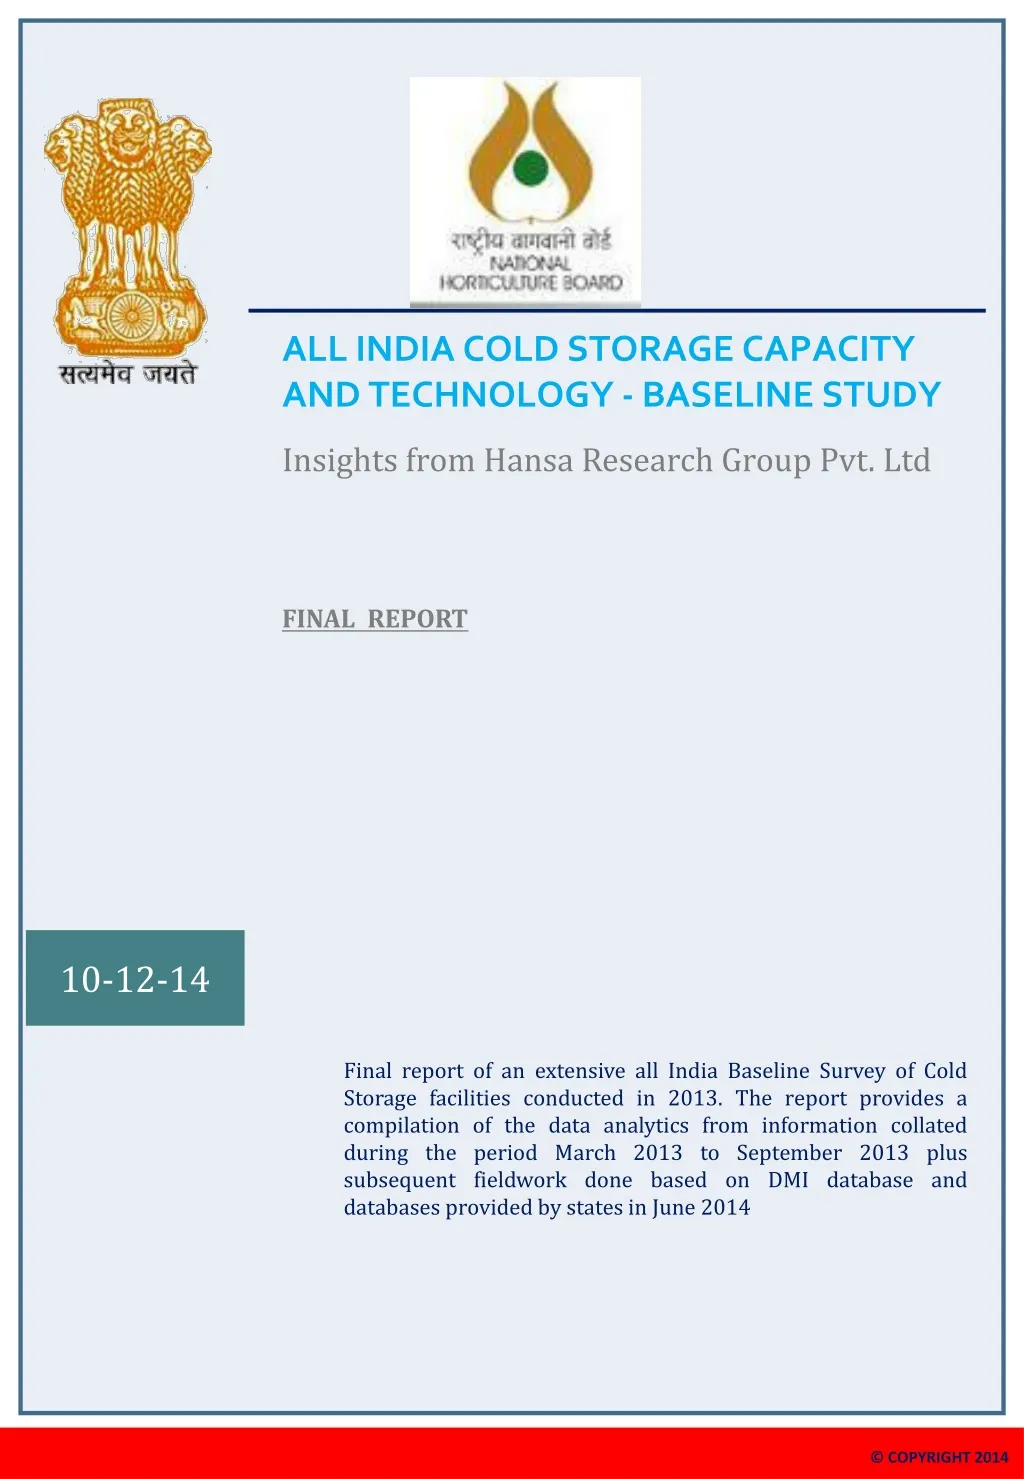 all india cold storage capacity and technology